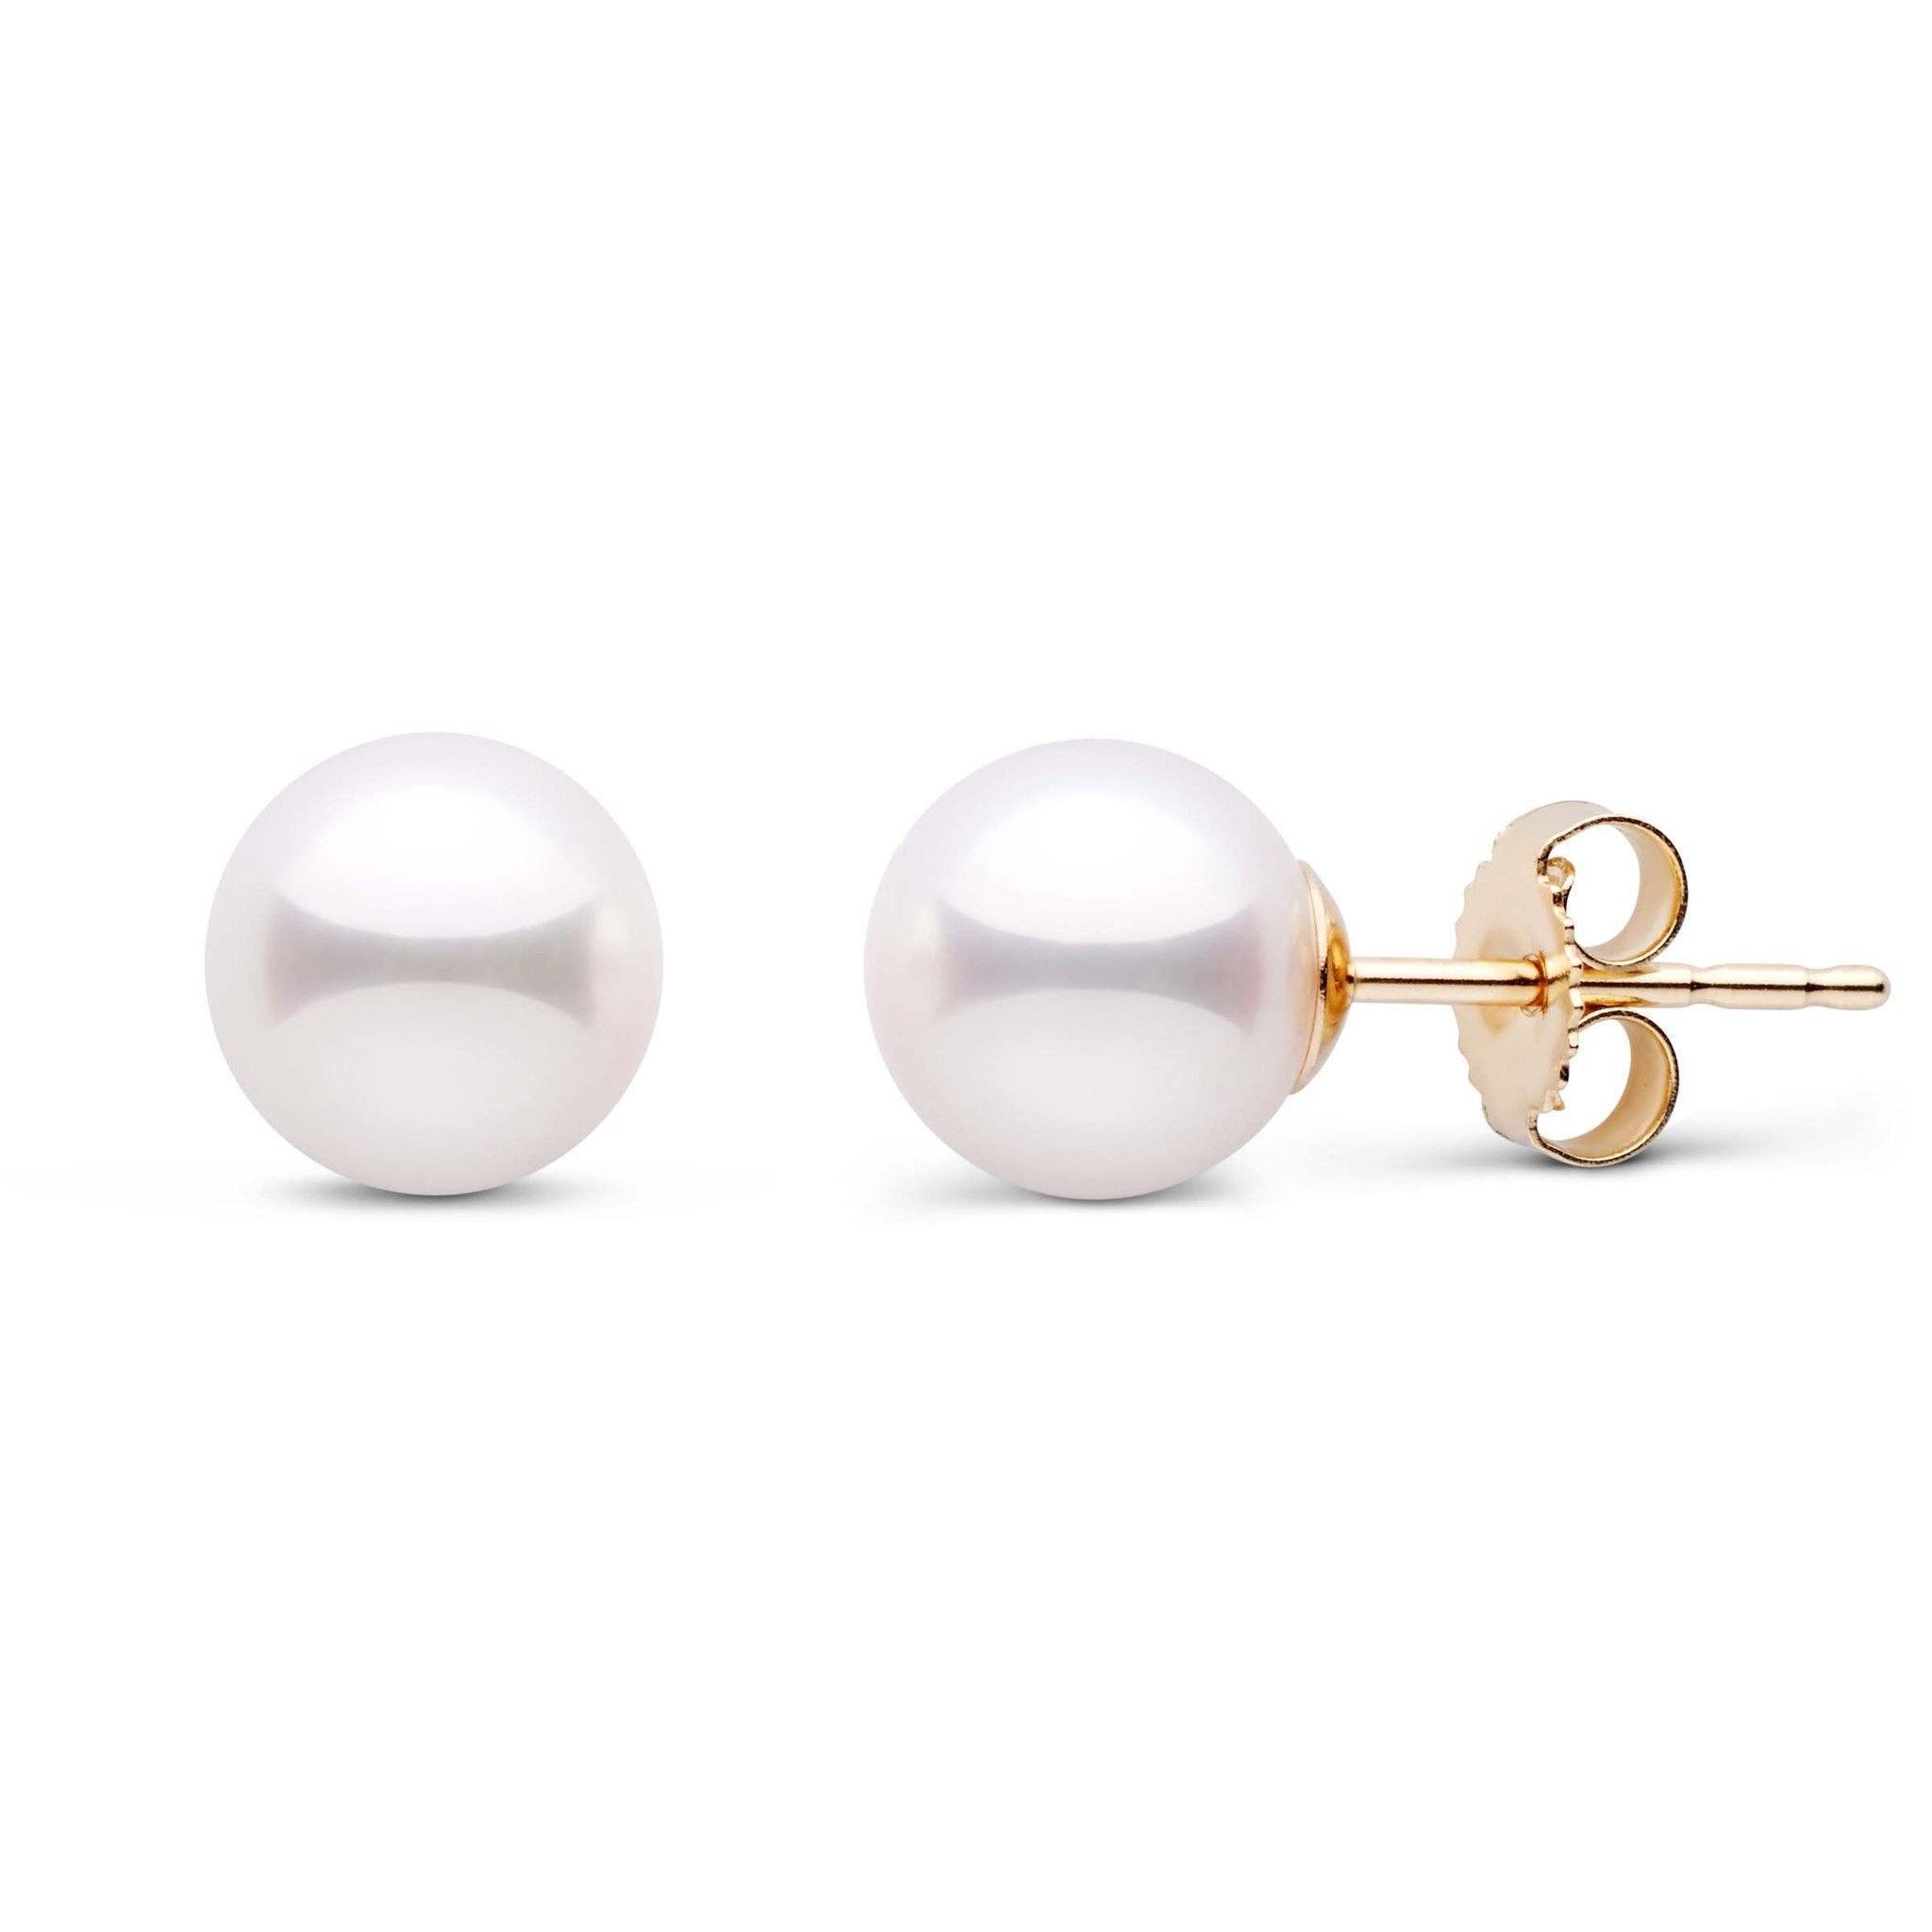 White Japanese Akoya Round Pearl Stud Earrings, 7.0-7.5mm 18K Yellow Gold / 7.0-7.5mm AAA Quality